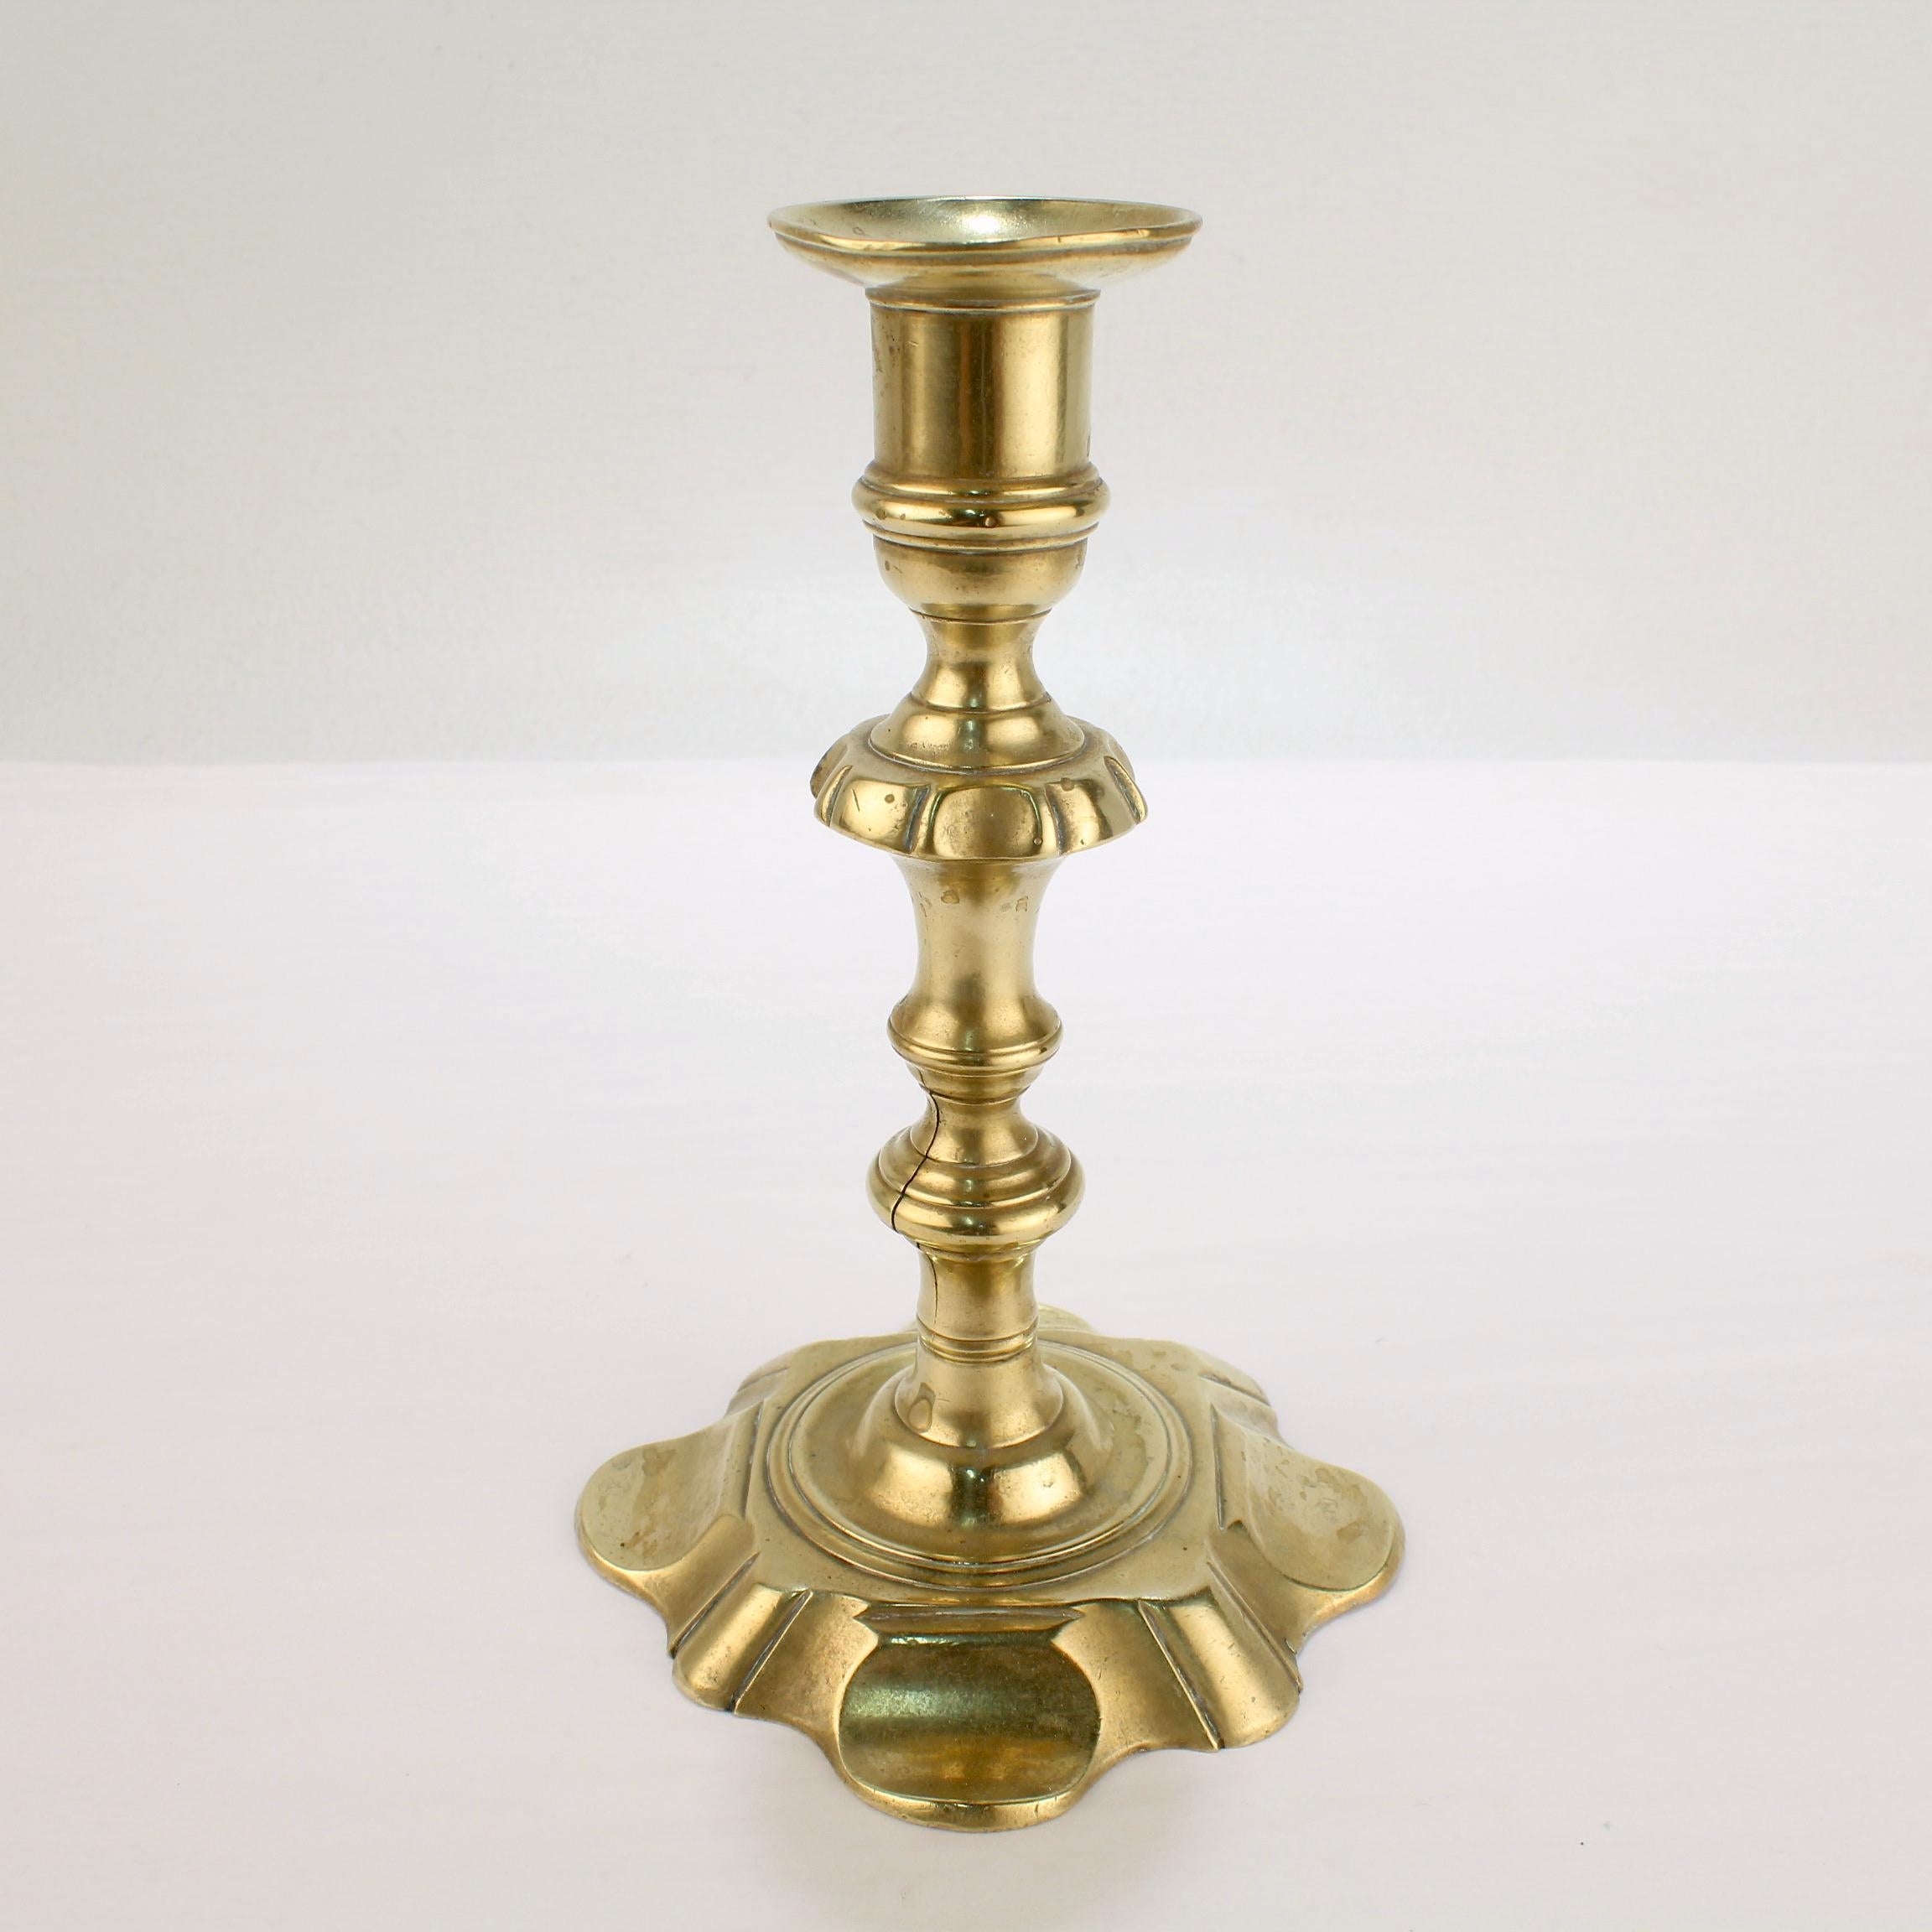 A fine antique George II English candlestick.

With a 8 lobed petal base, turned shaft, and integral bobeche. 

Simply a fine period candlestick!

Date:
Mid-18th century

Overall condition:
It is in overall fair, as-pictured, used estate